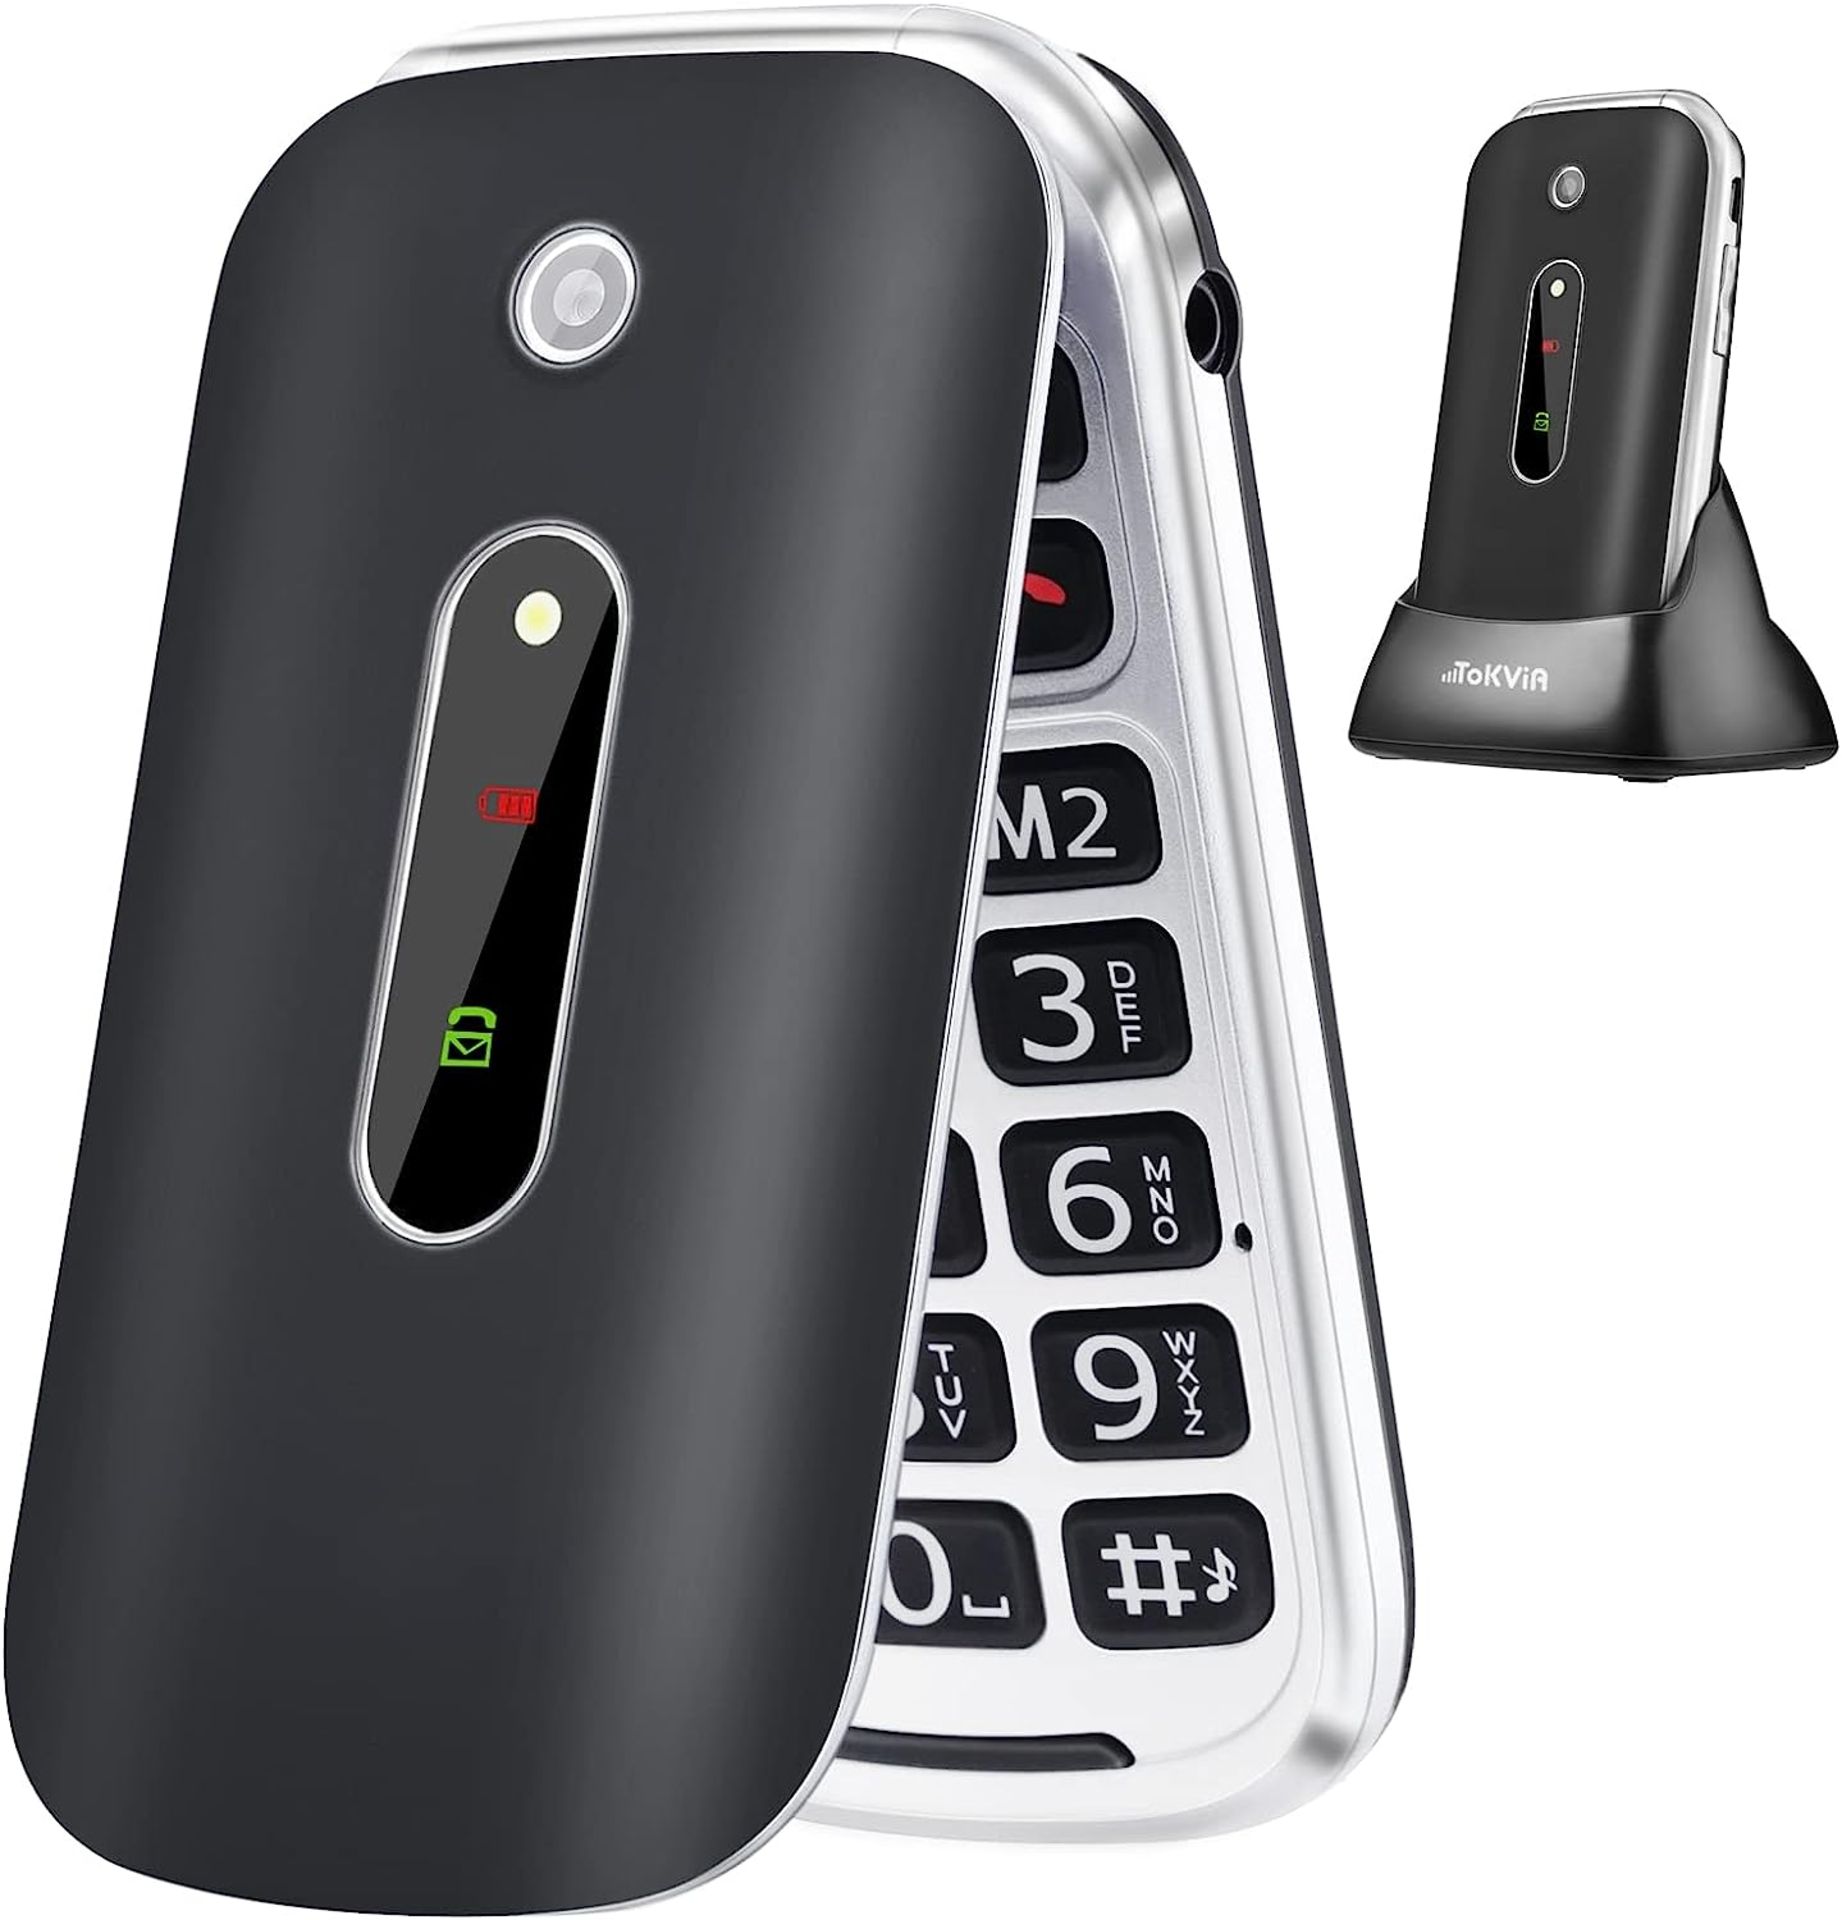 RRP £37.99 TOKVIA Flip Phone for Seniors with Large Buttons | GSM Mobile phone for the Elderly